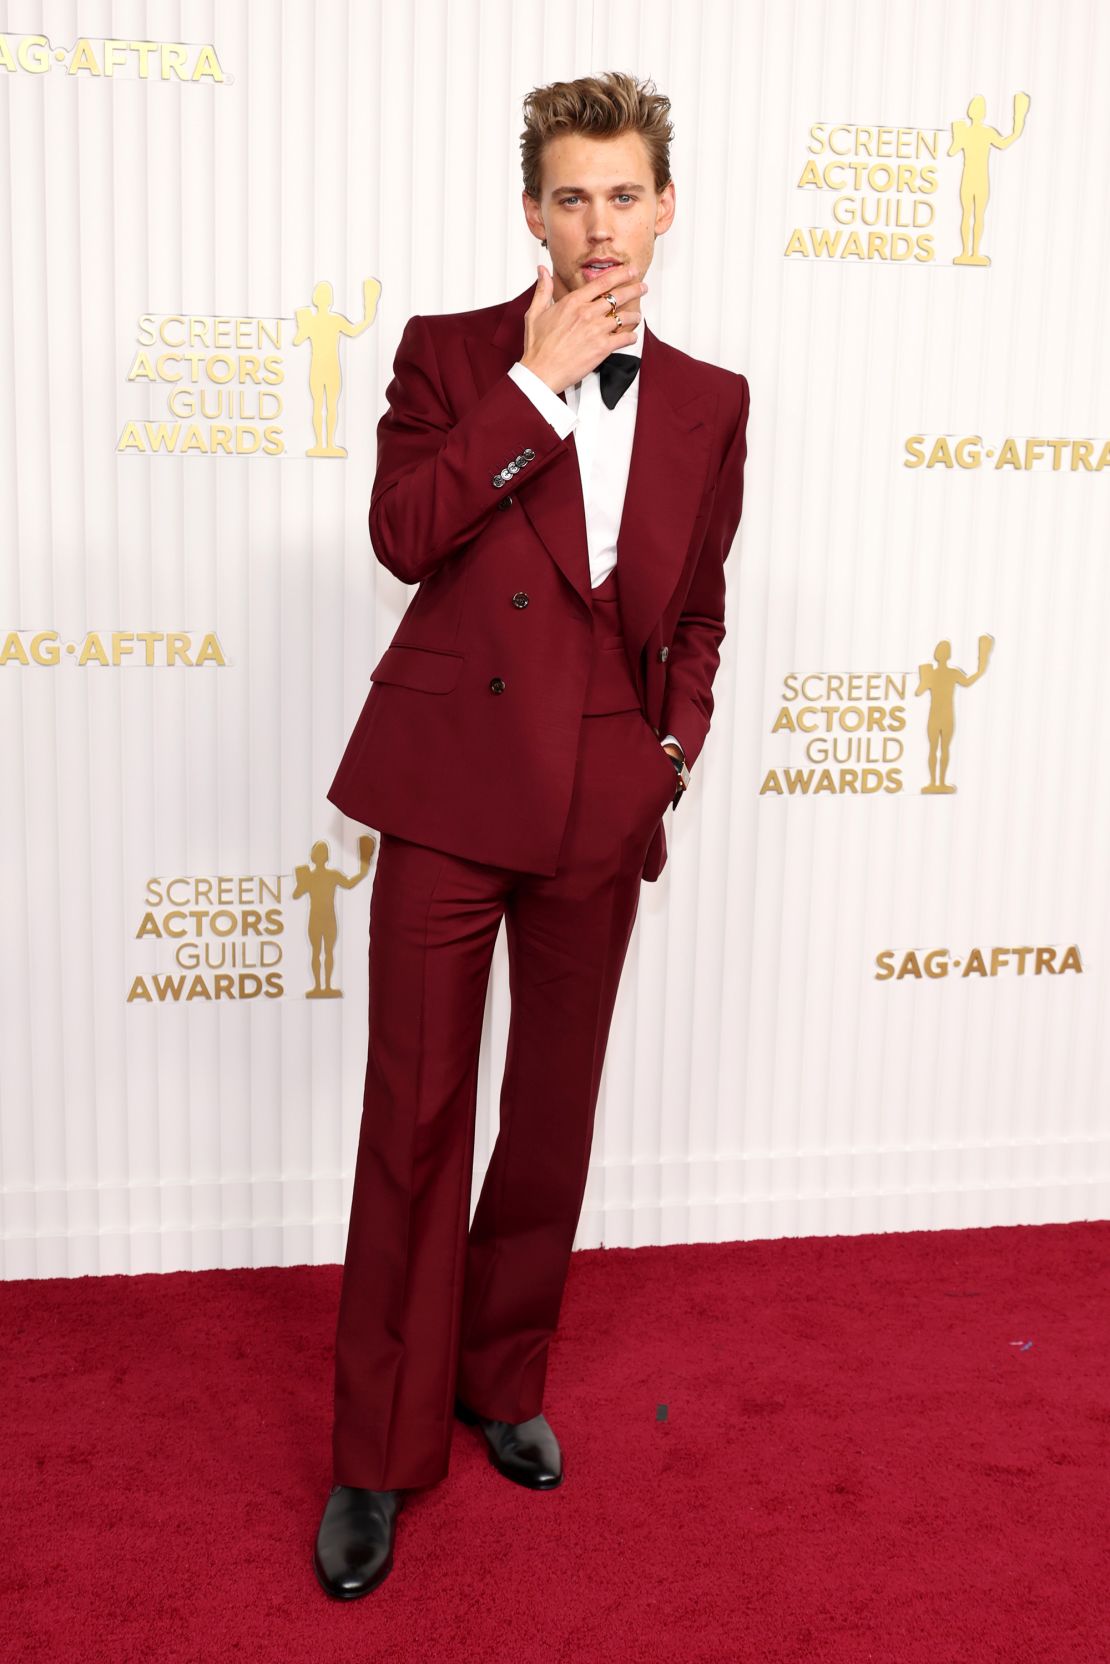 The 10 best dressed at the SAG Awards 2023